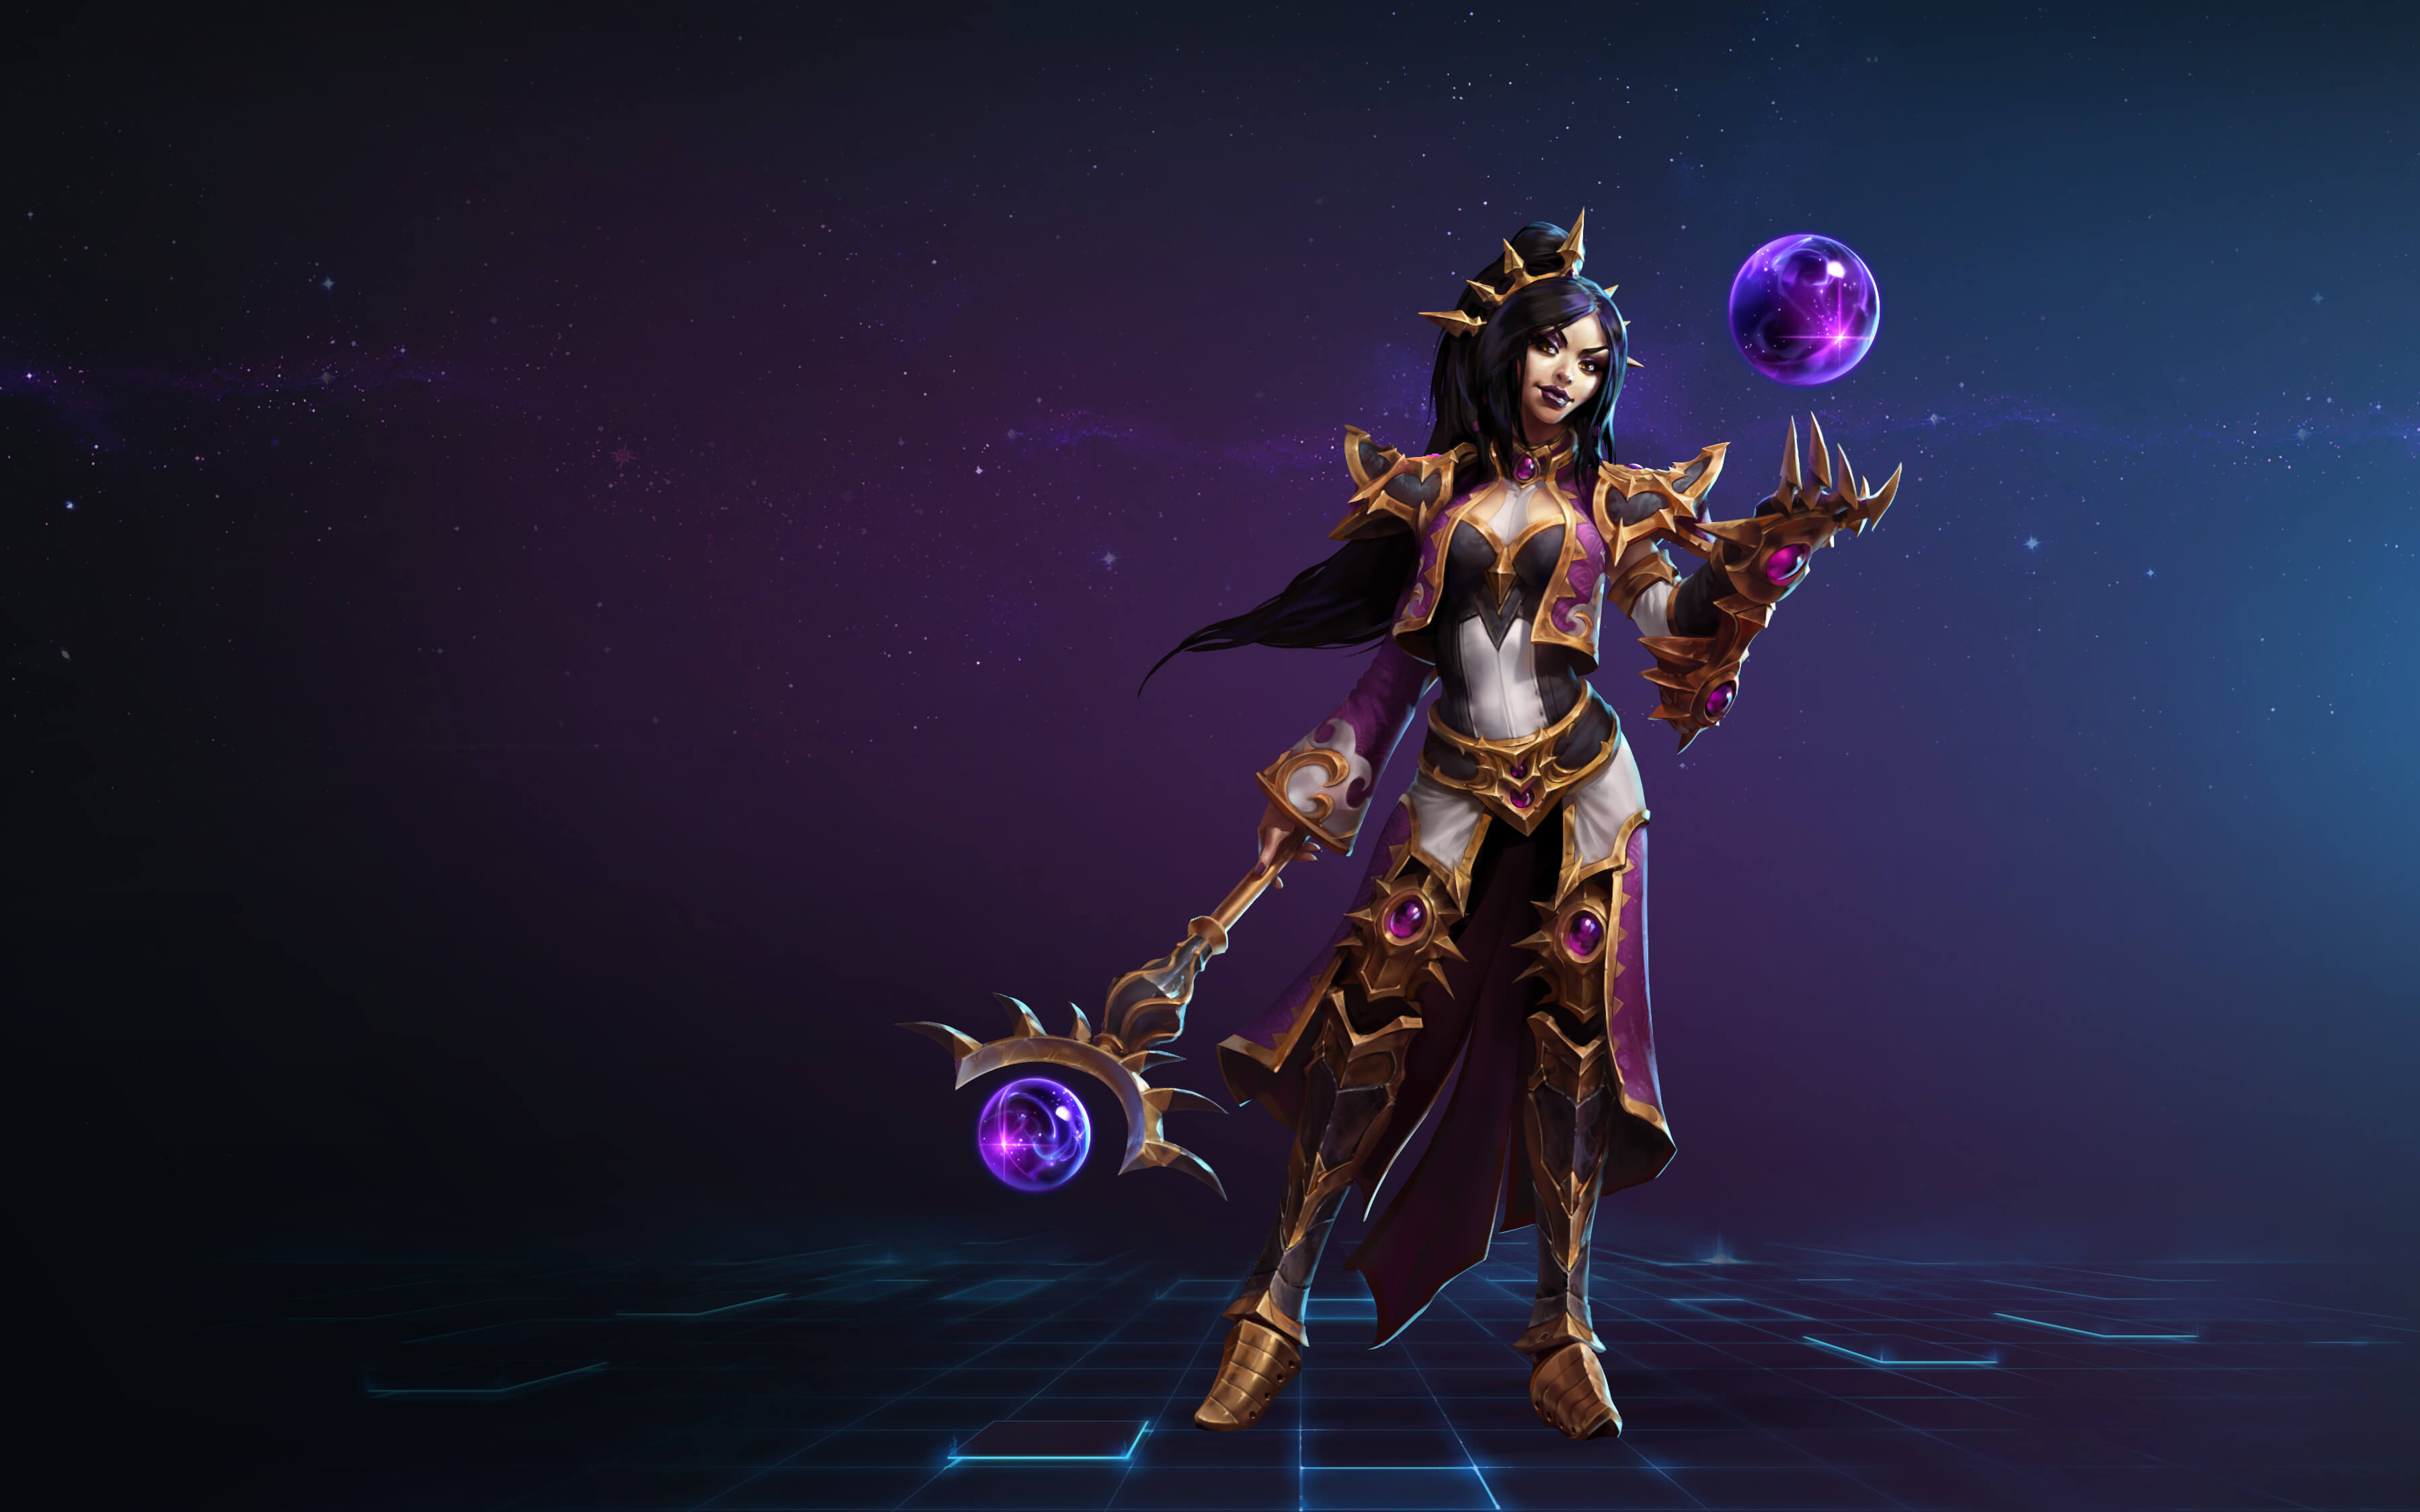 download heroes of the storm builds for free